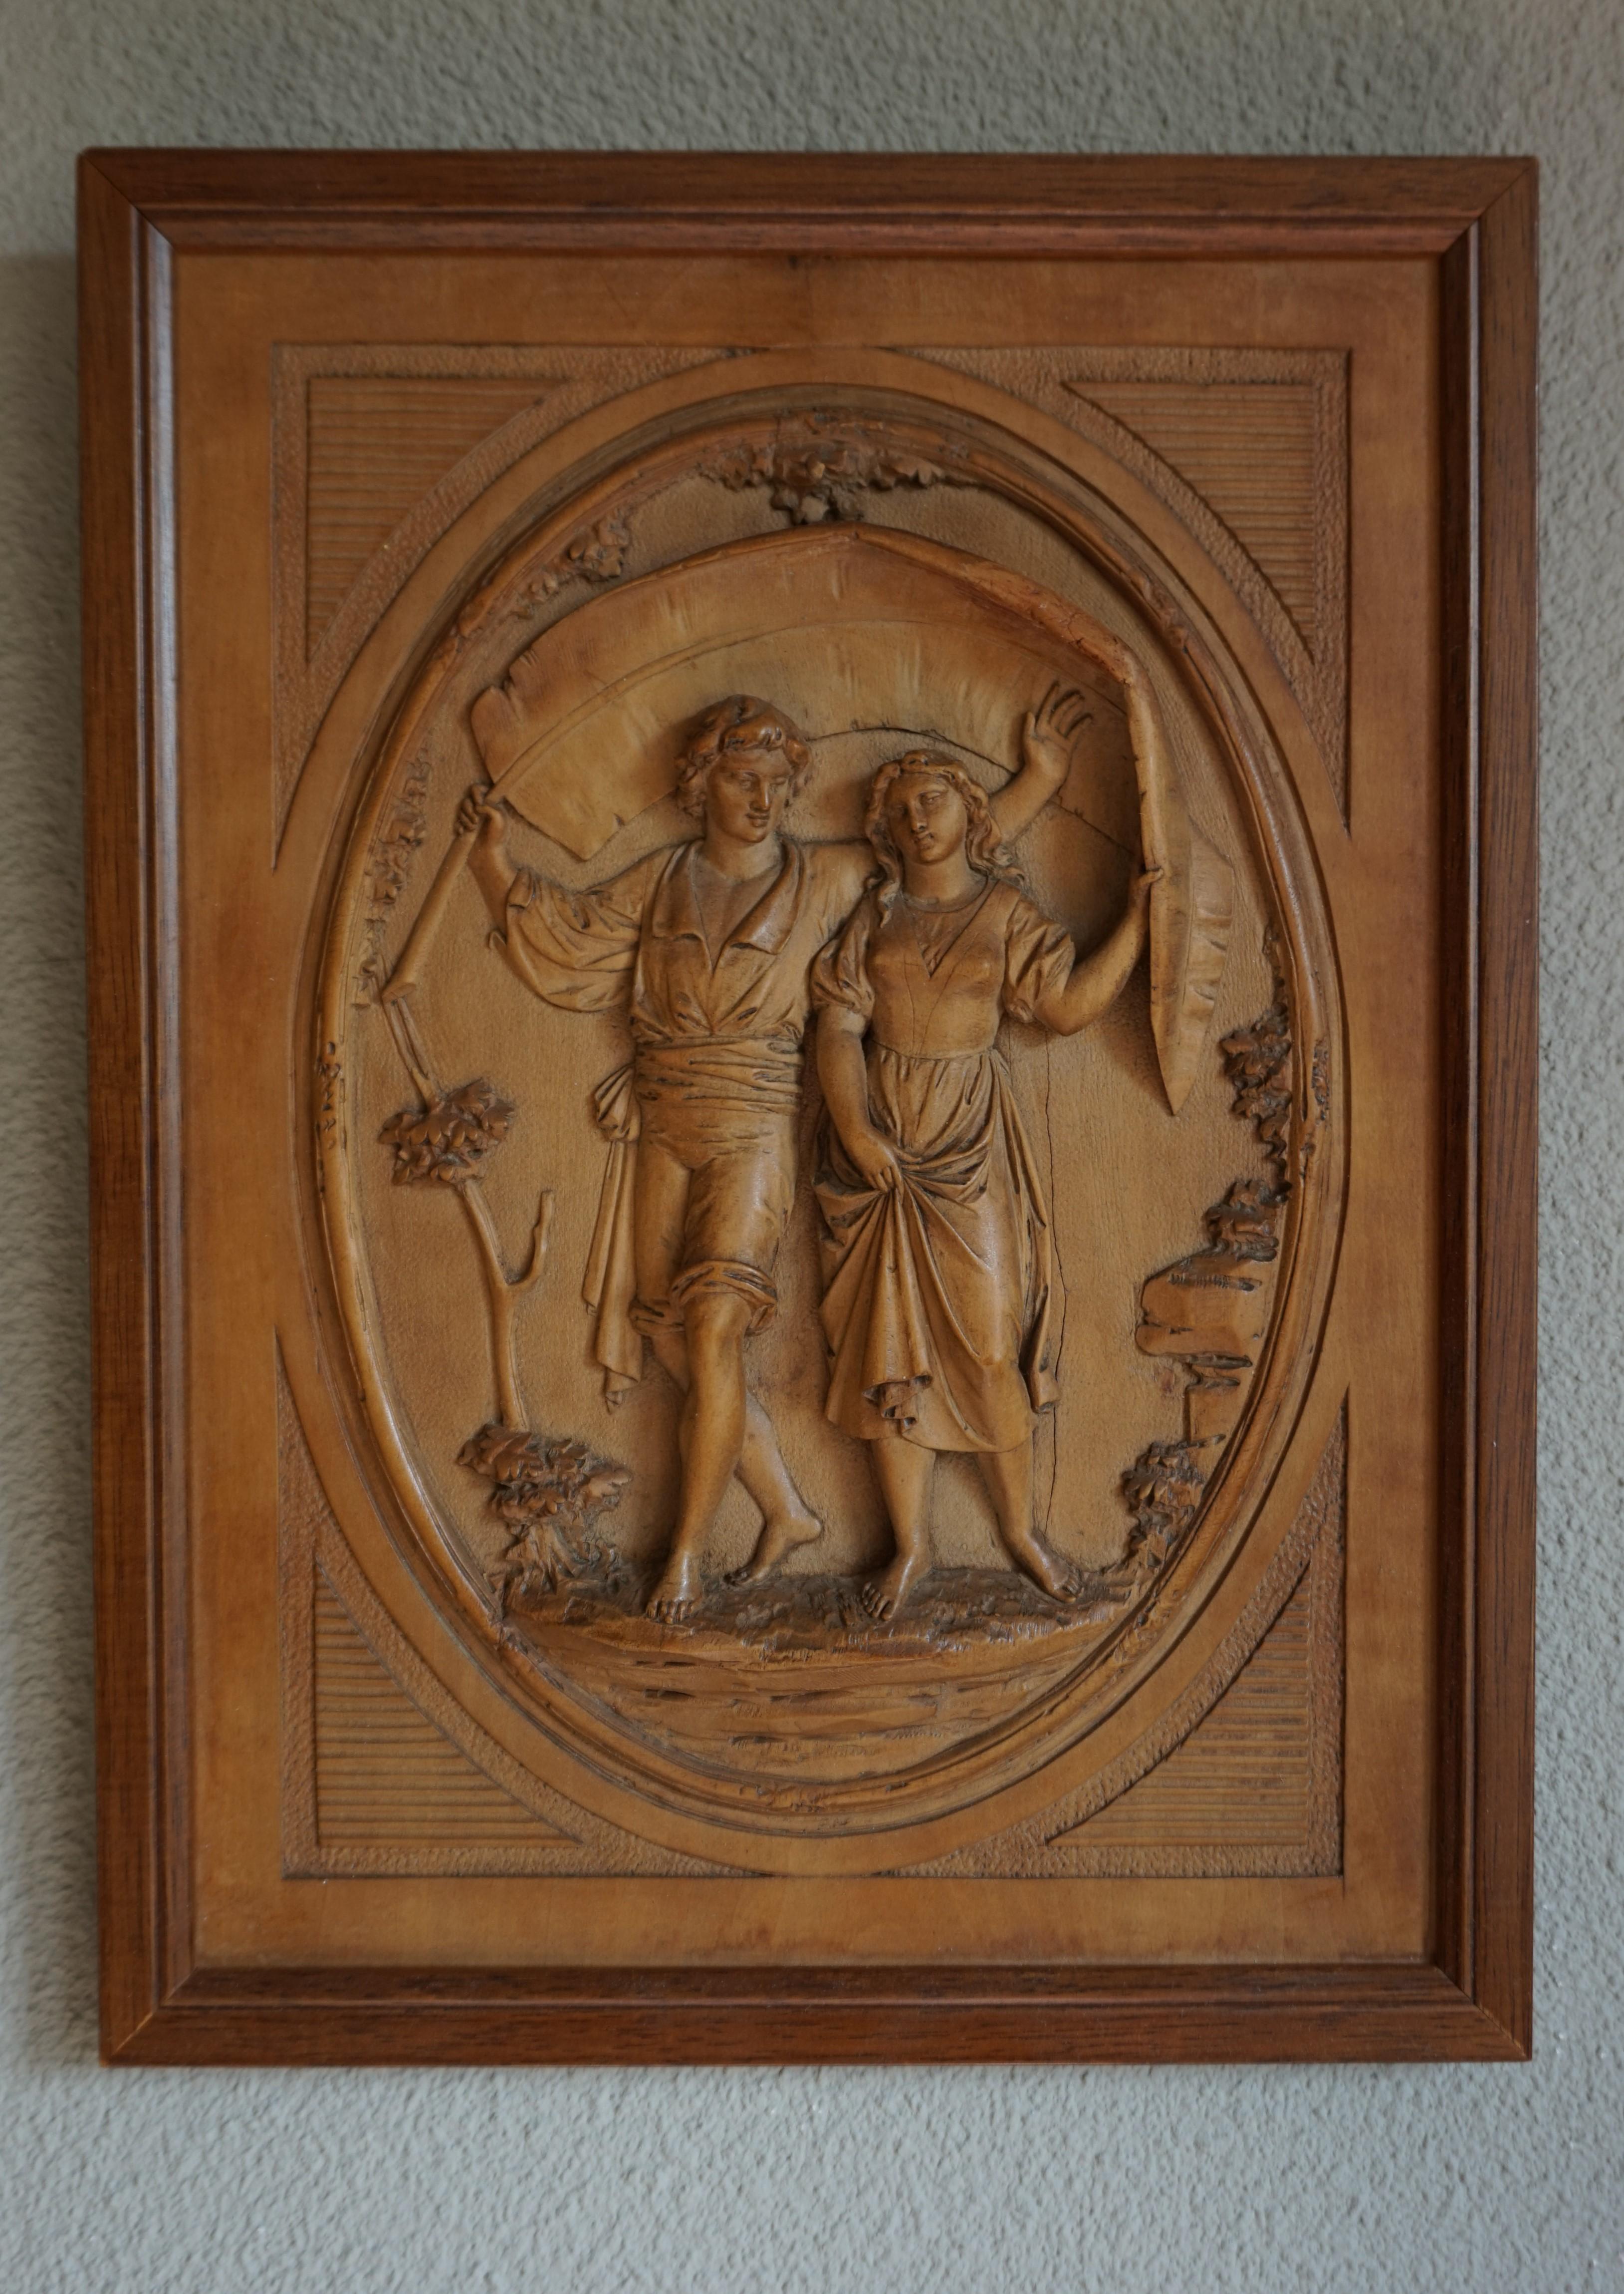 Beautiful quality, one of a kind German or Italian antique wall sculpture.

This rare wall sculpture from the late 1800s is all hand carved out of solid boxwood. Anyone who is capable of creating such a marvelous sculpture out of a wood as hard as